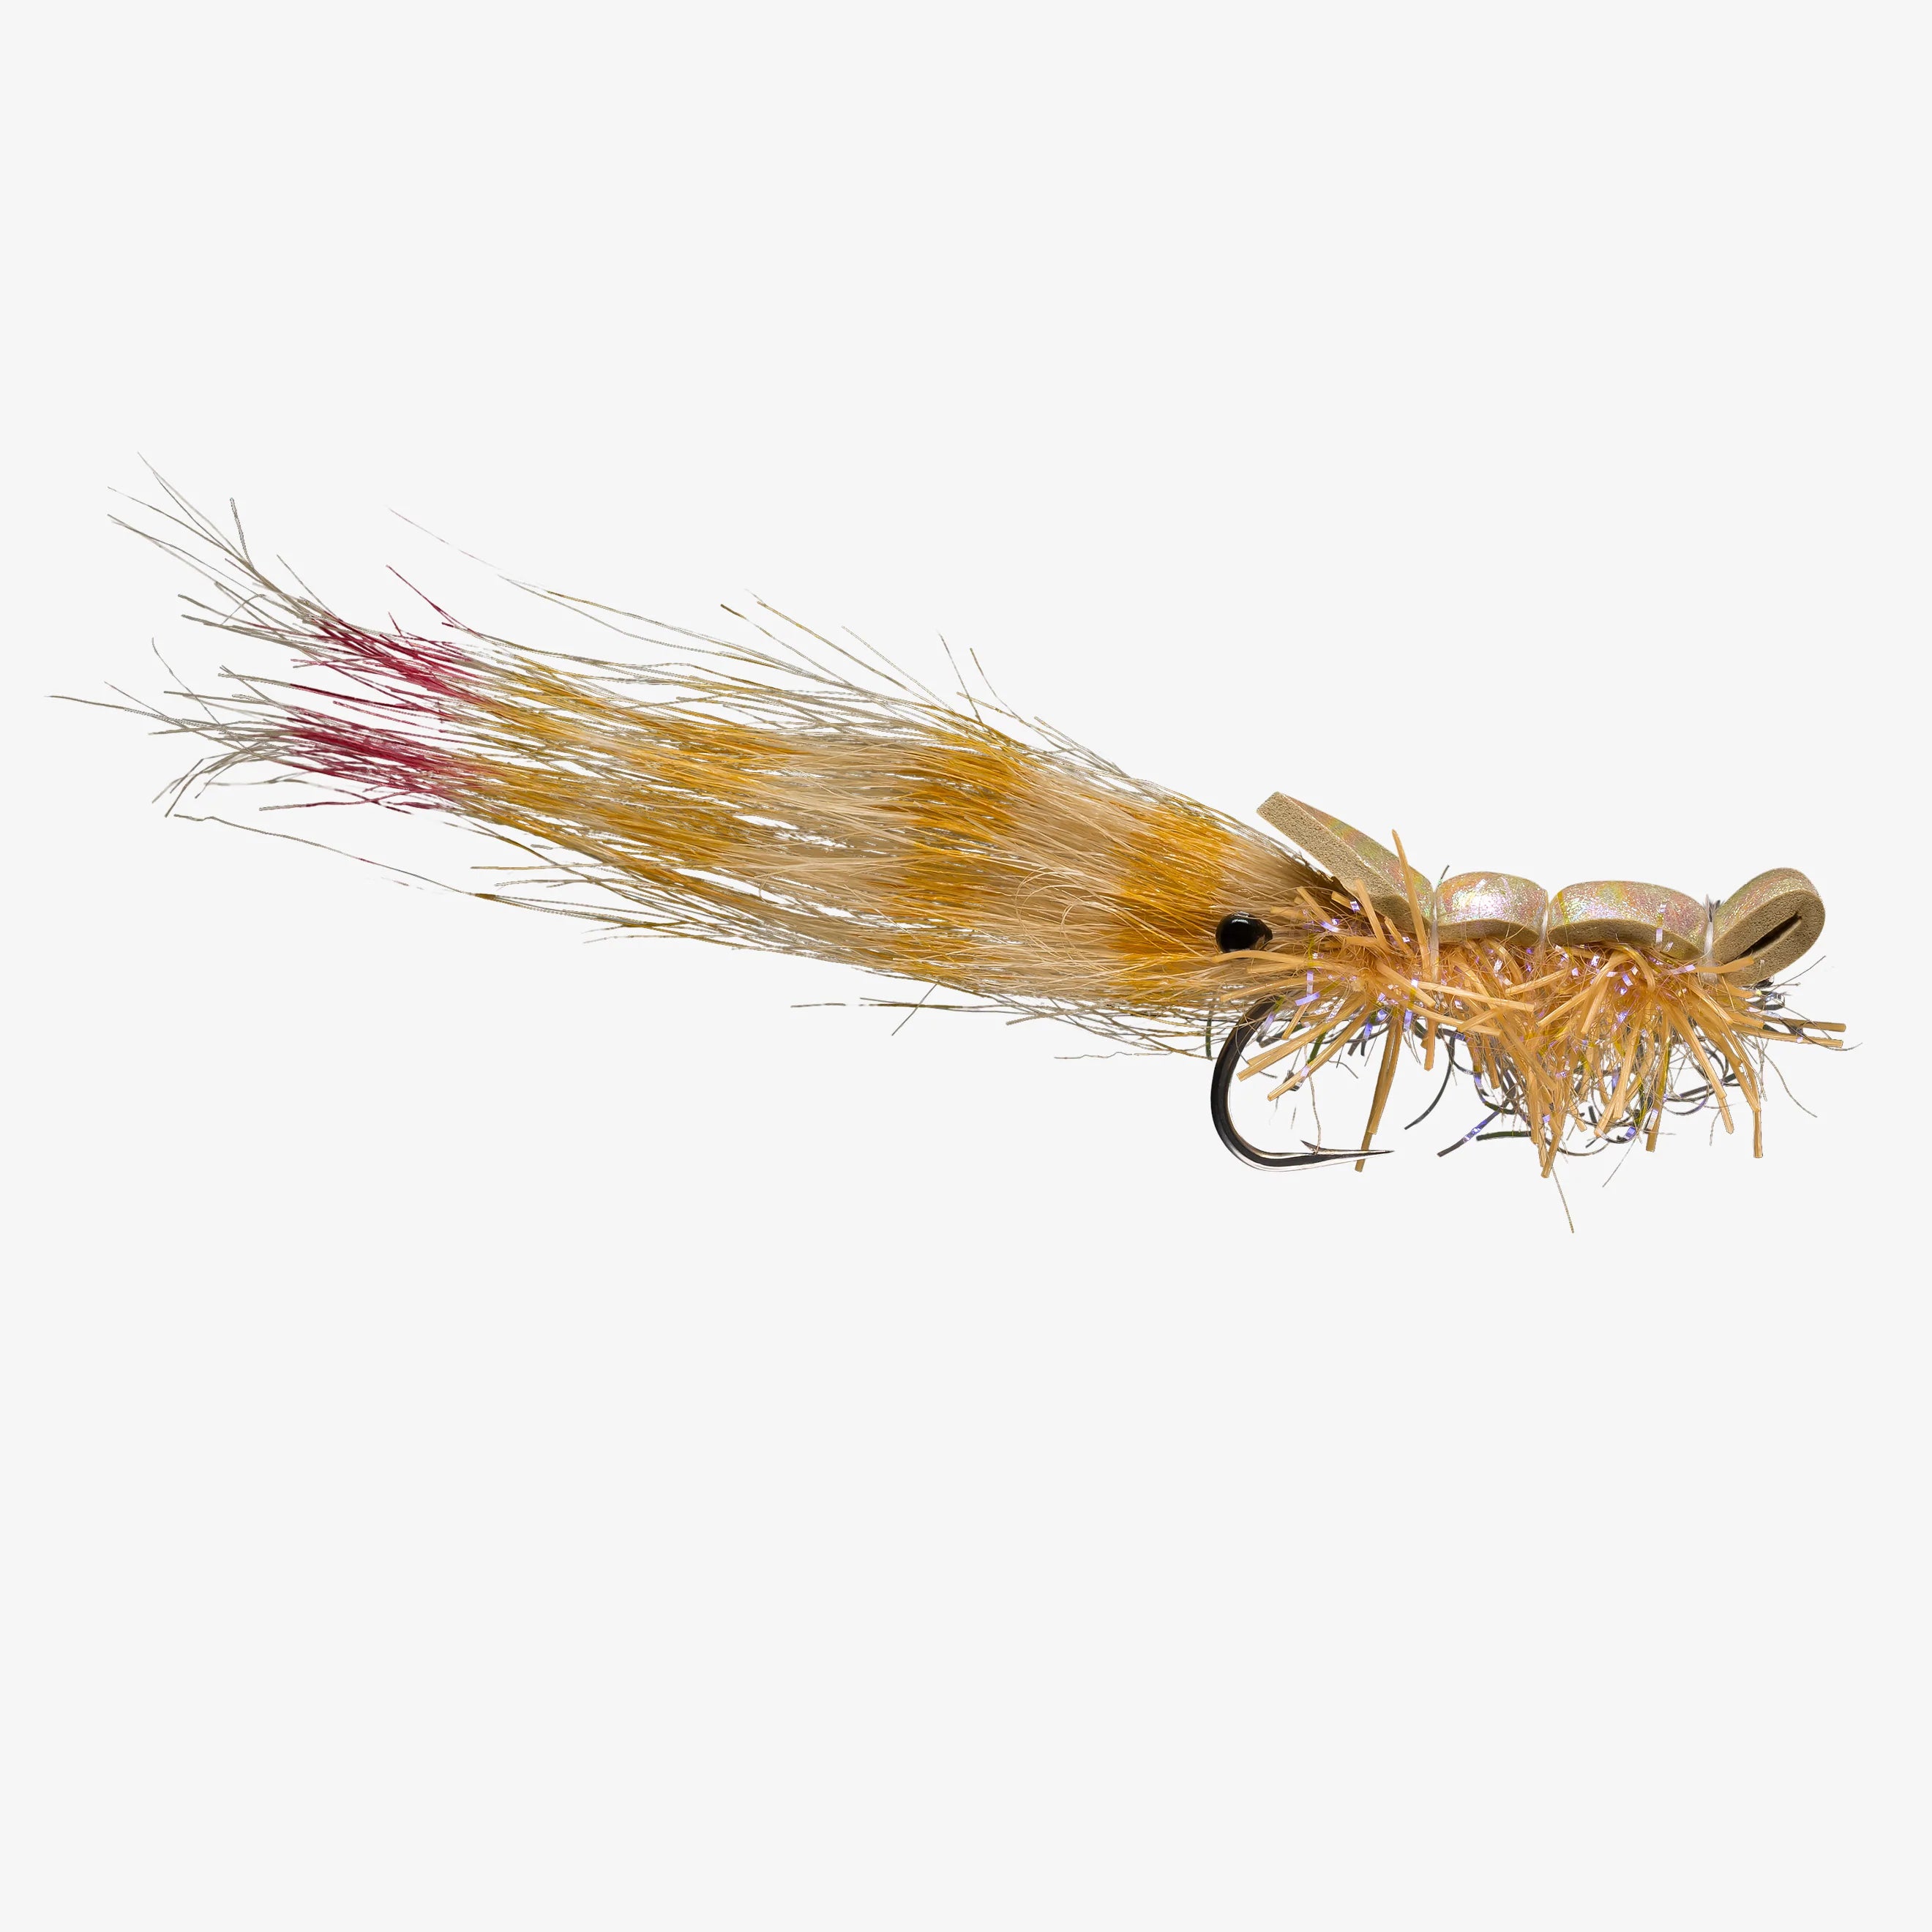 Saltwater Fly Poppers // The Flyfisher, Australia's Fly Shop